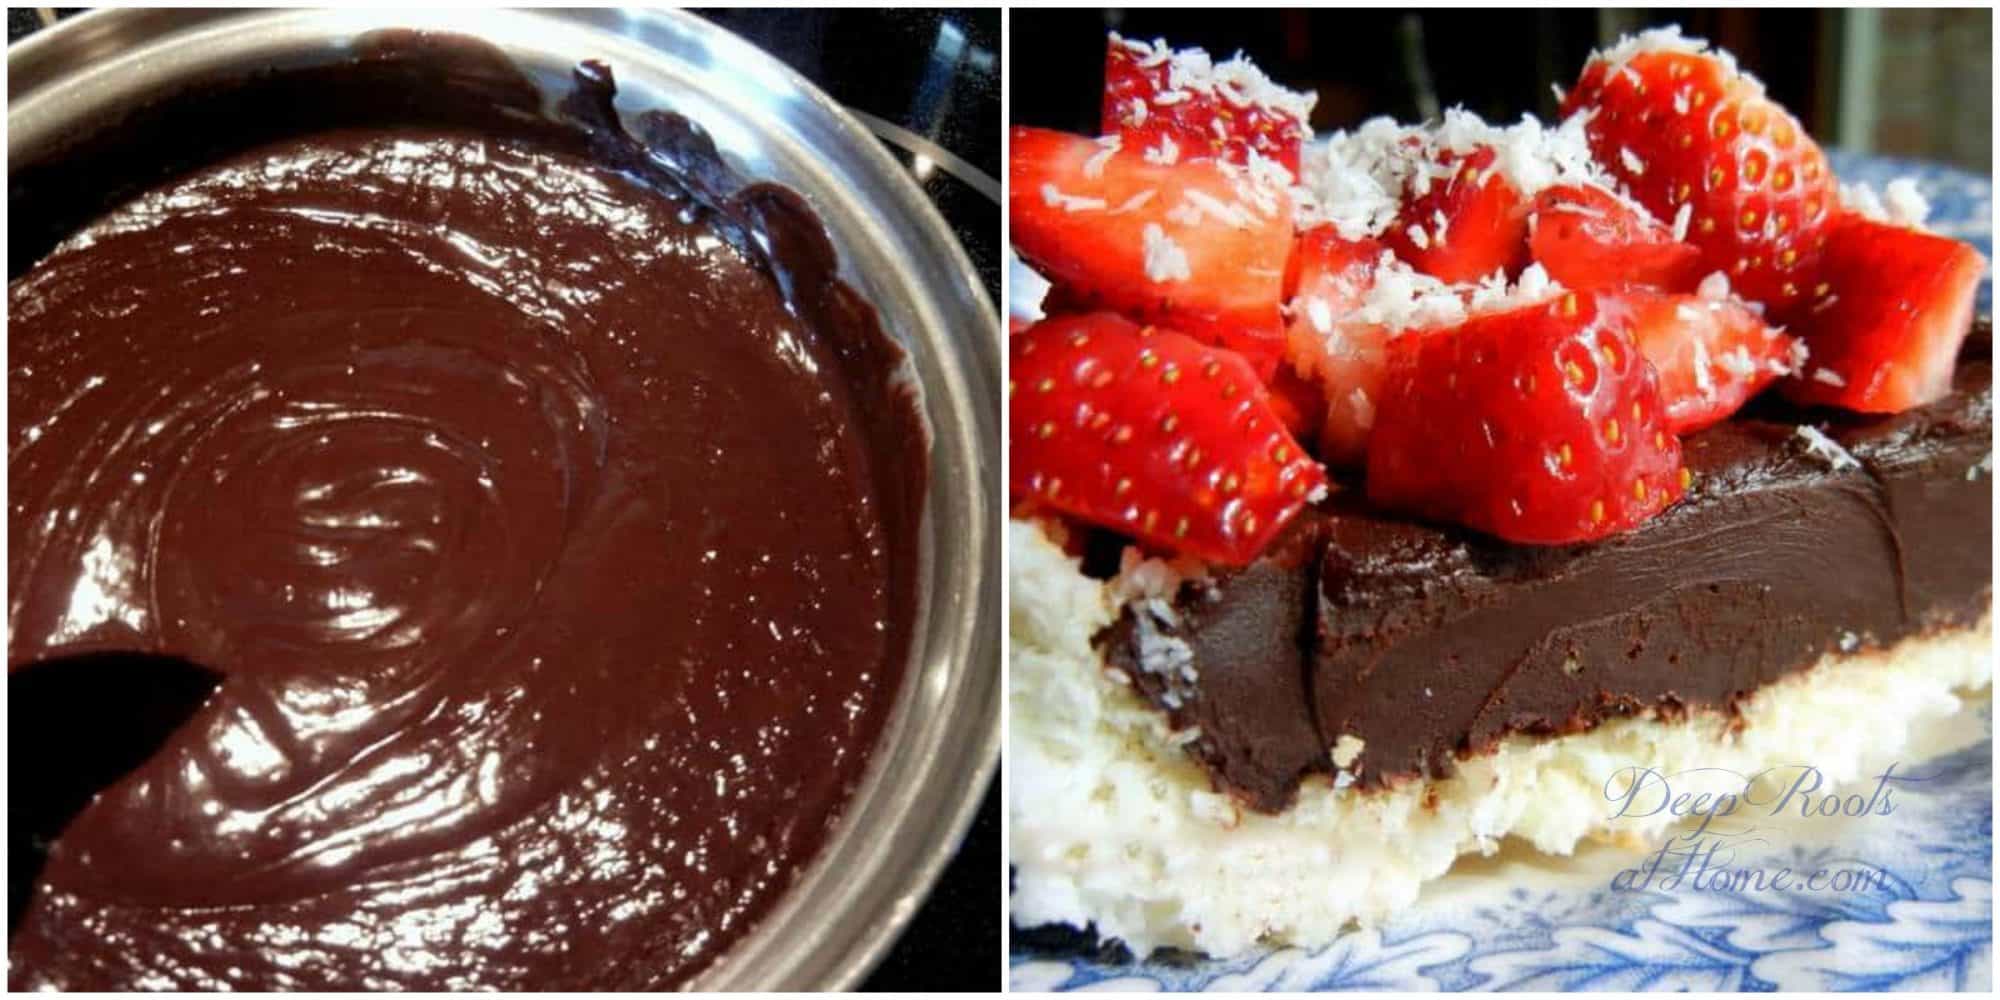 making rich chocolate filling and adding strawberries